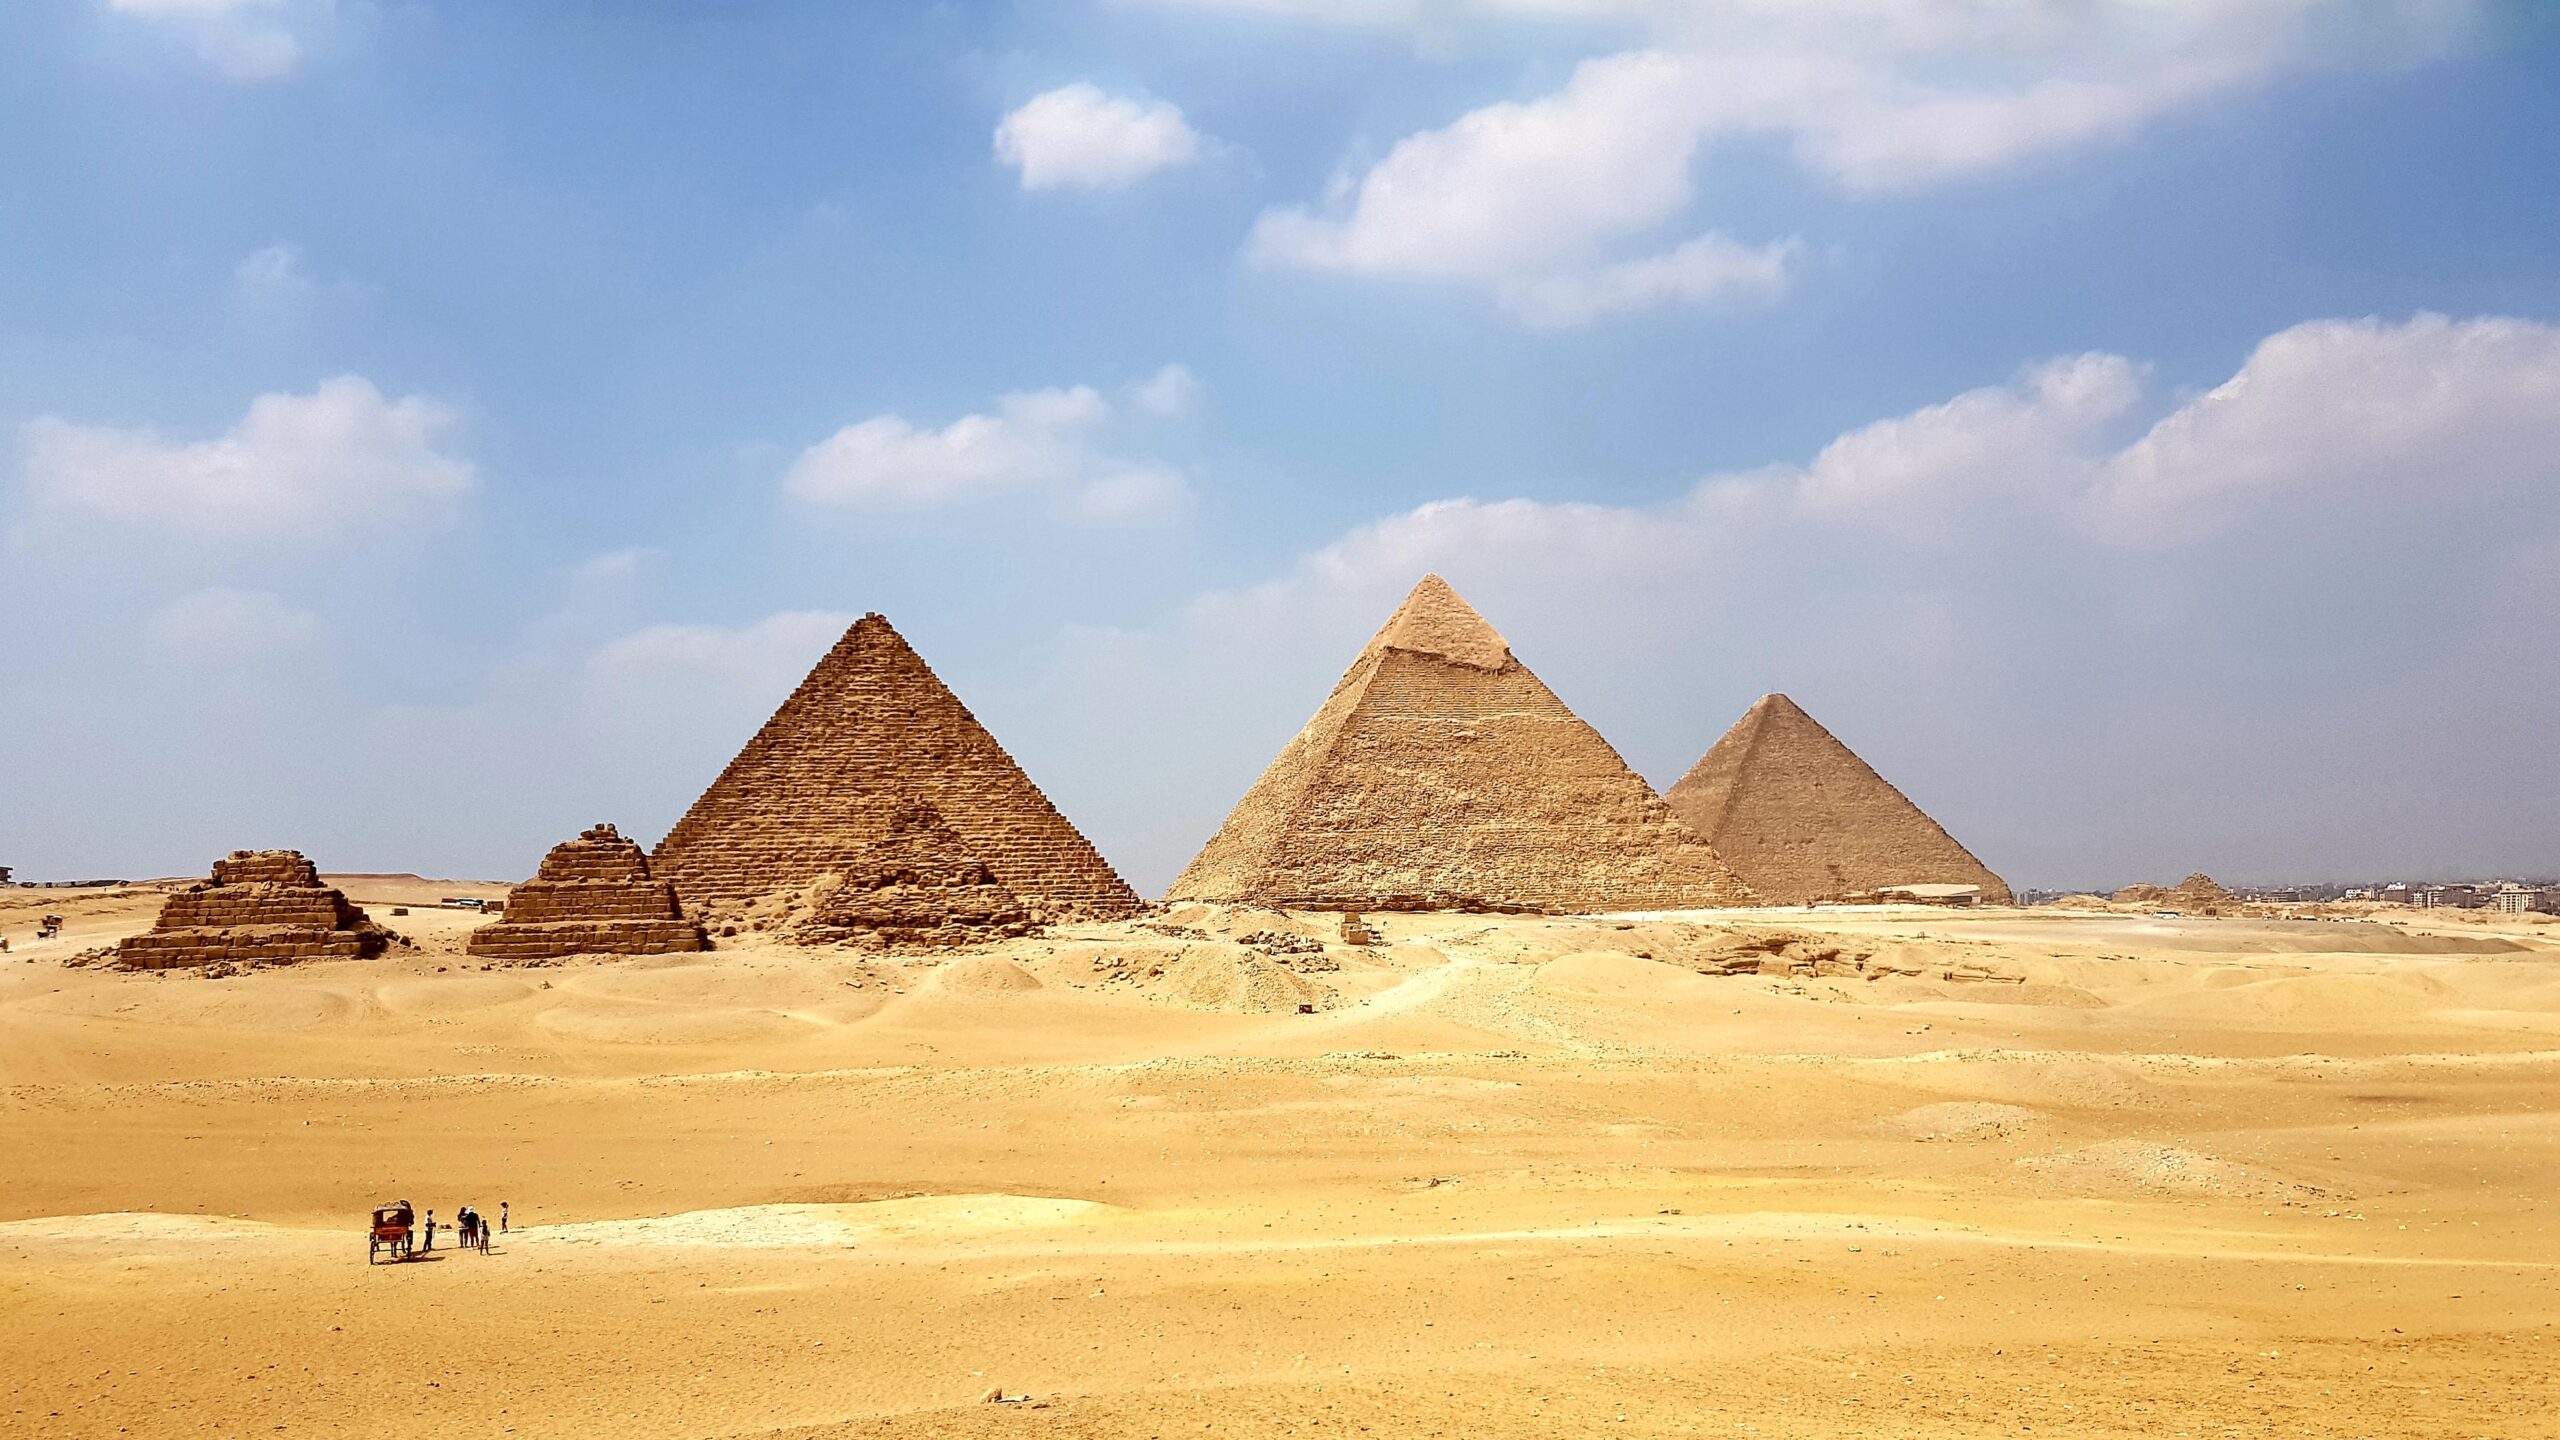 The Best Time To Visit Egypt